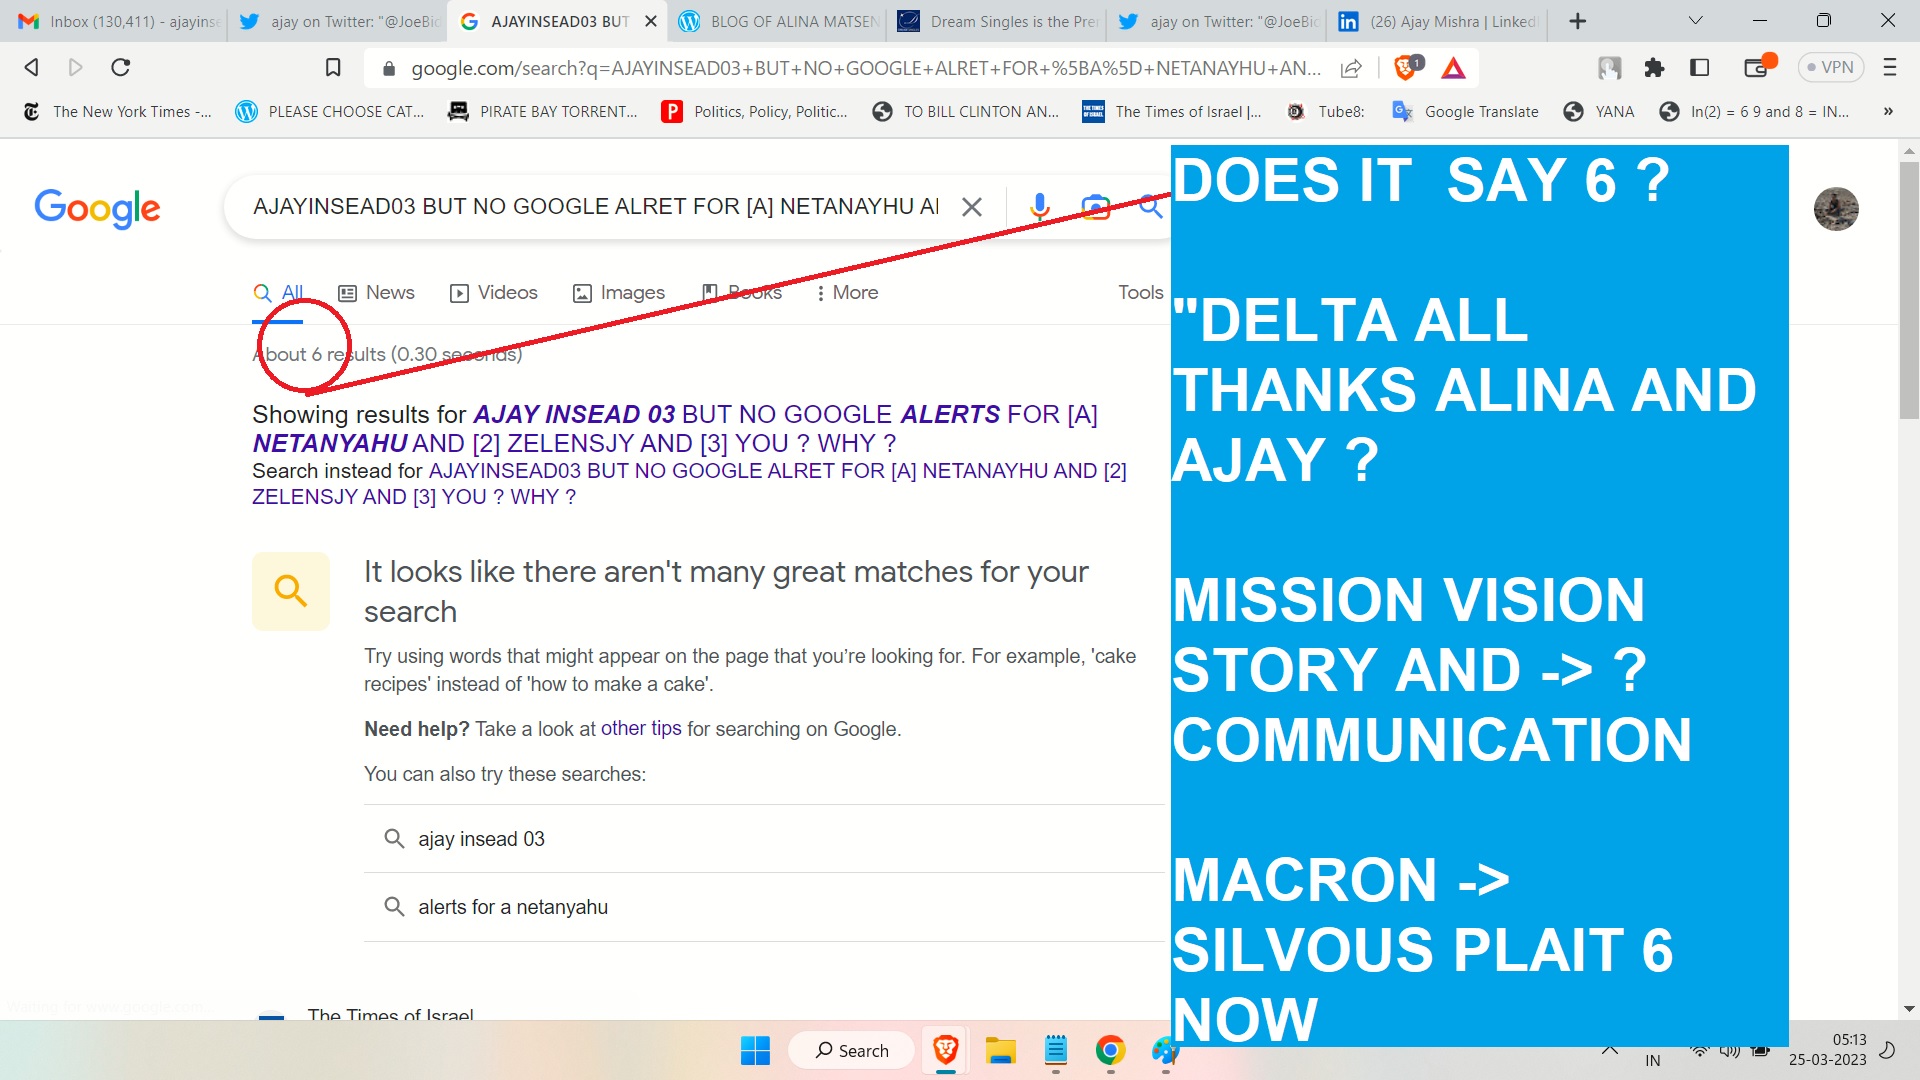 AJAYINSEAD03 BUT NO GOOGLE ALRET FOR [A] NETANAYHU AND [2] ZELENSJY AND [3] YOU WHY - MISSION VISION STORY AND COMMUNICATION MACRON AND BIBI SIL VOUS PLAIT 6 NOW